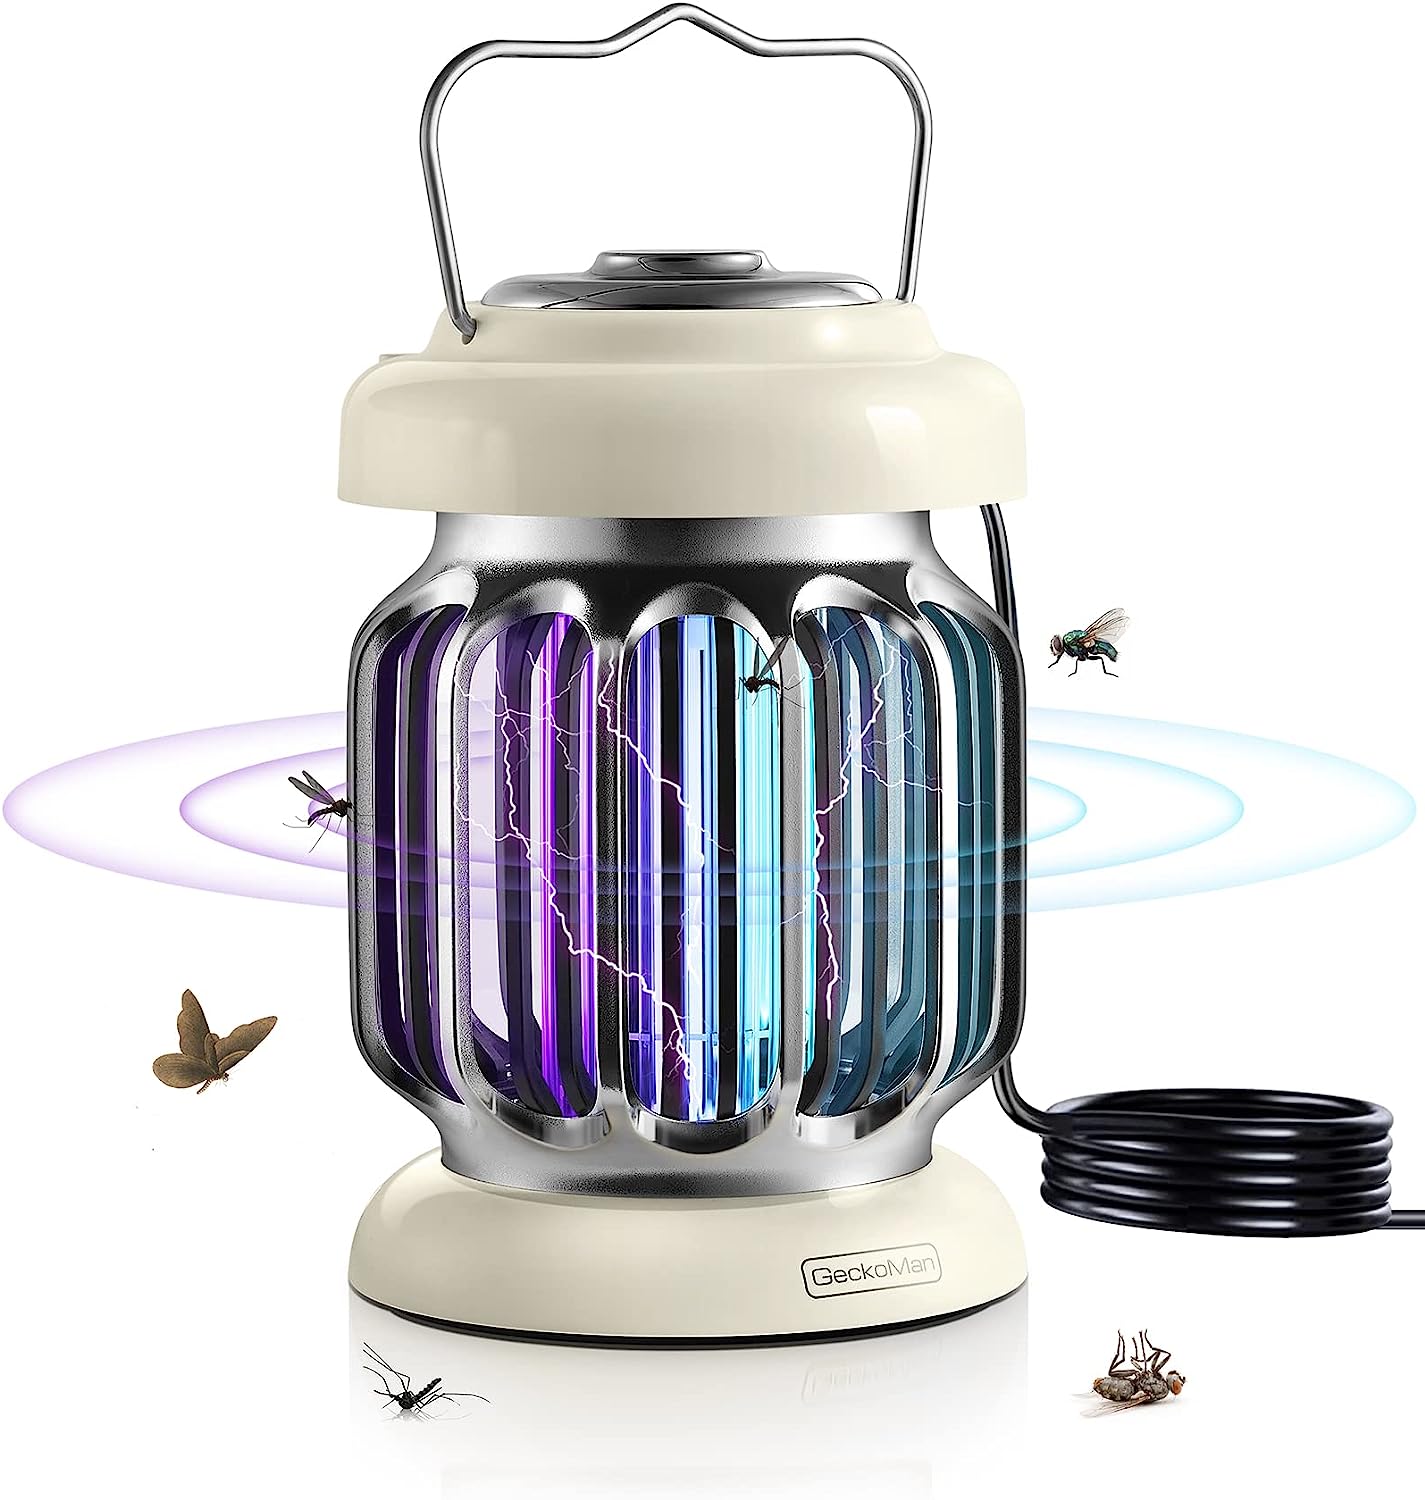 Bug Zapper Indoor and Outdoor Mosquito Repellent and Fly Traps